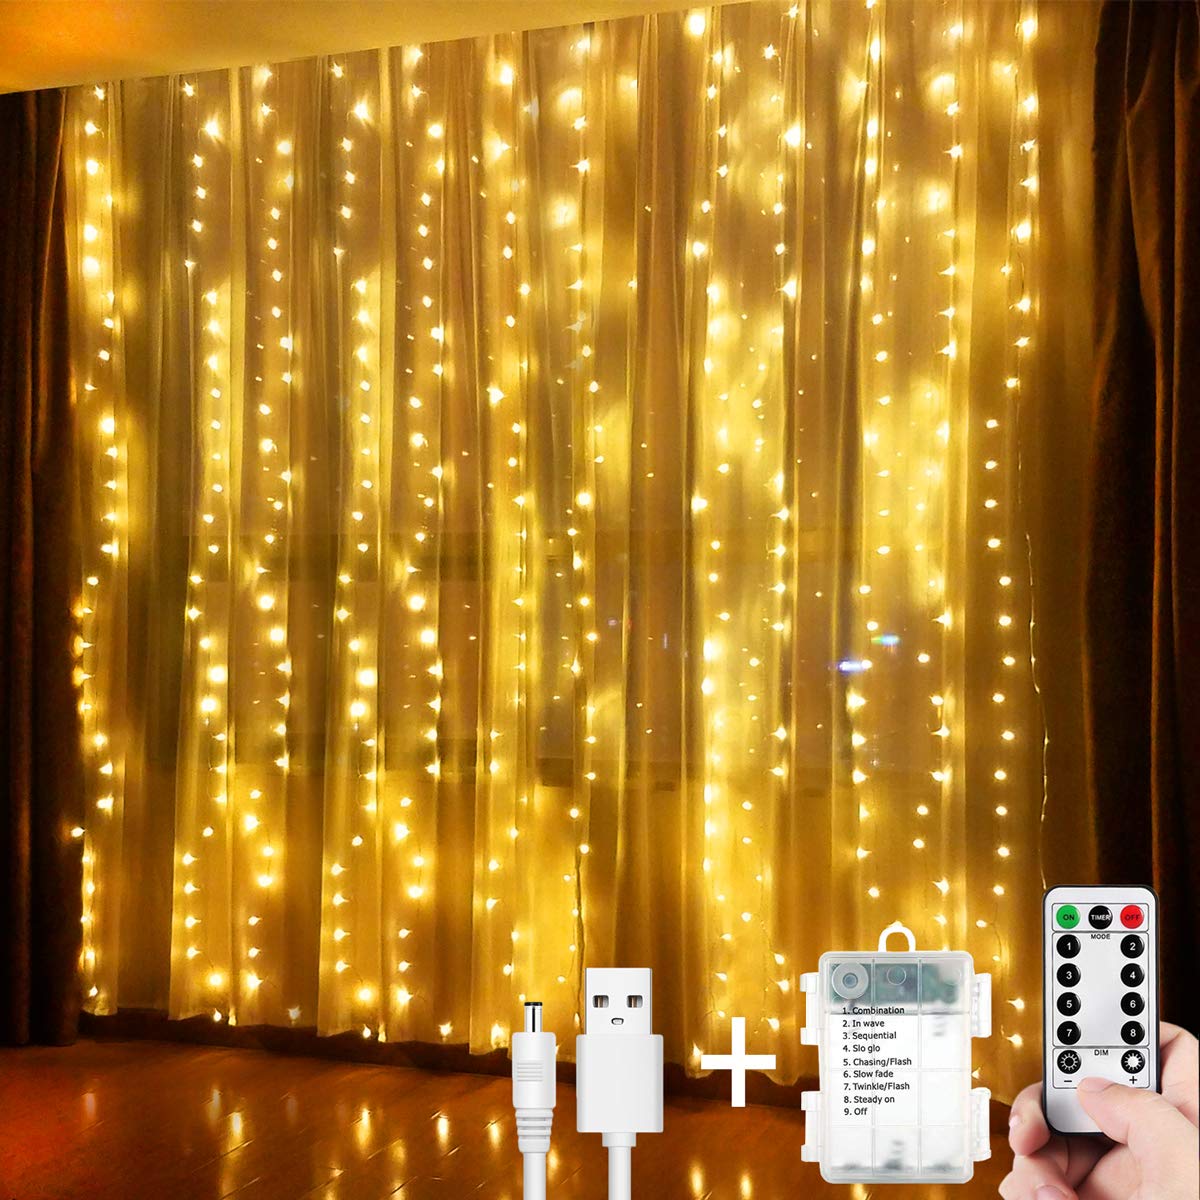 Christmas Lights Led Curtain Fairy Lights 300 LEDs 3M*3M String Lights USB Operated Or Battery Powered 8 Modes with Remote &Timer, Waterfall Indoor Outdoor String Lights (Warm White)